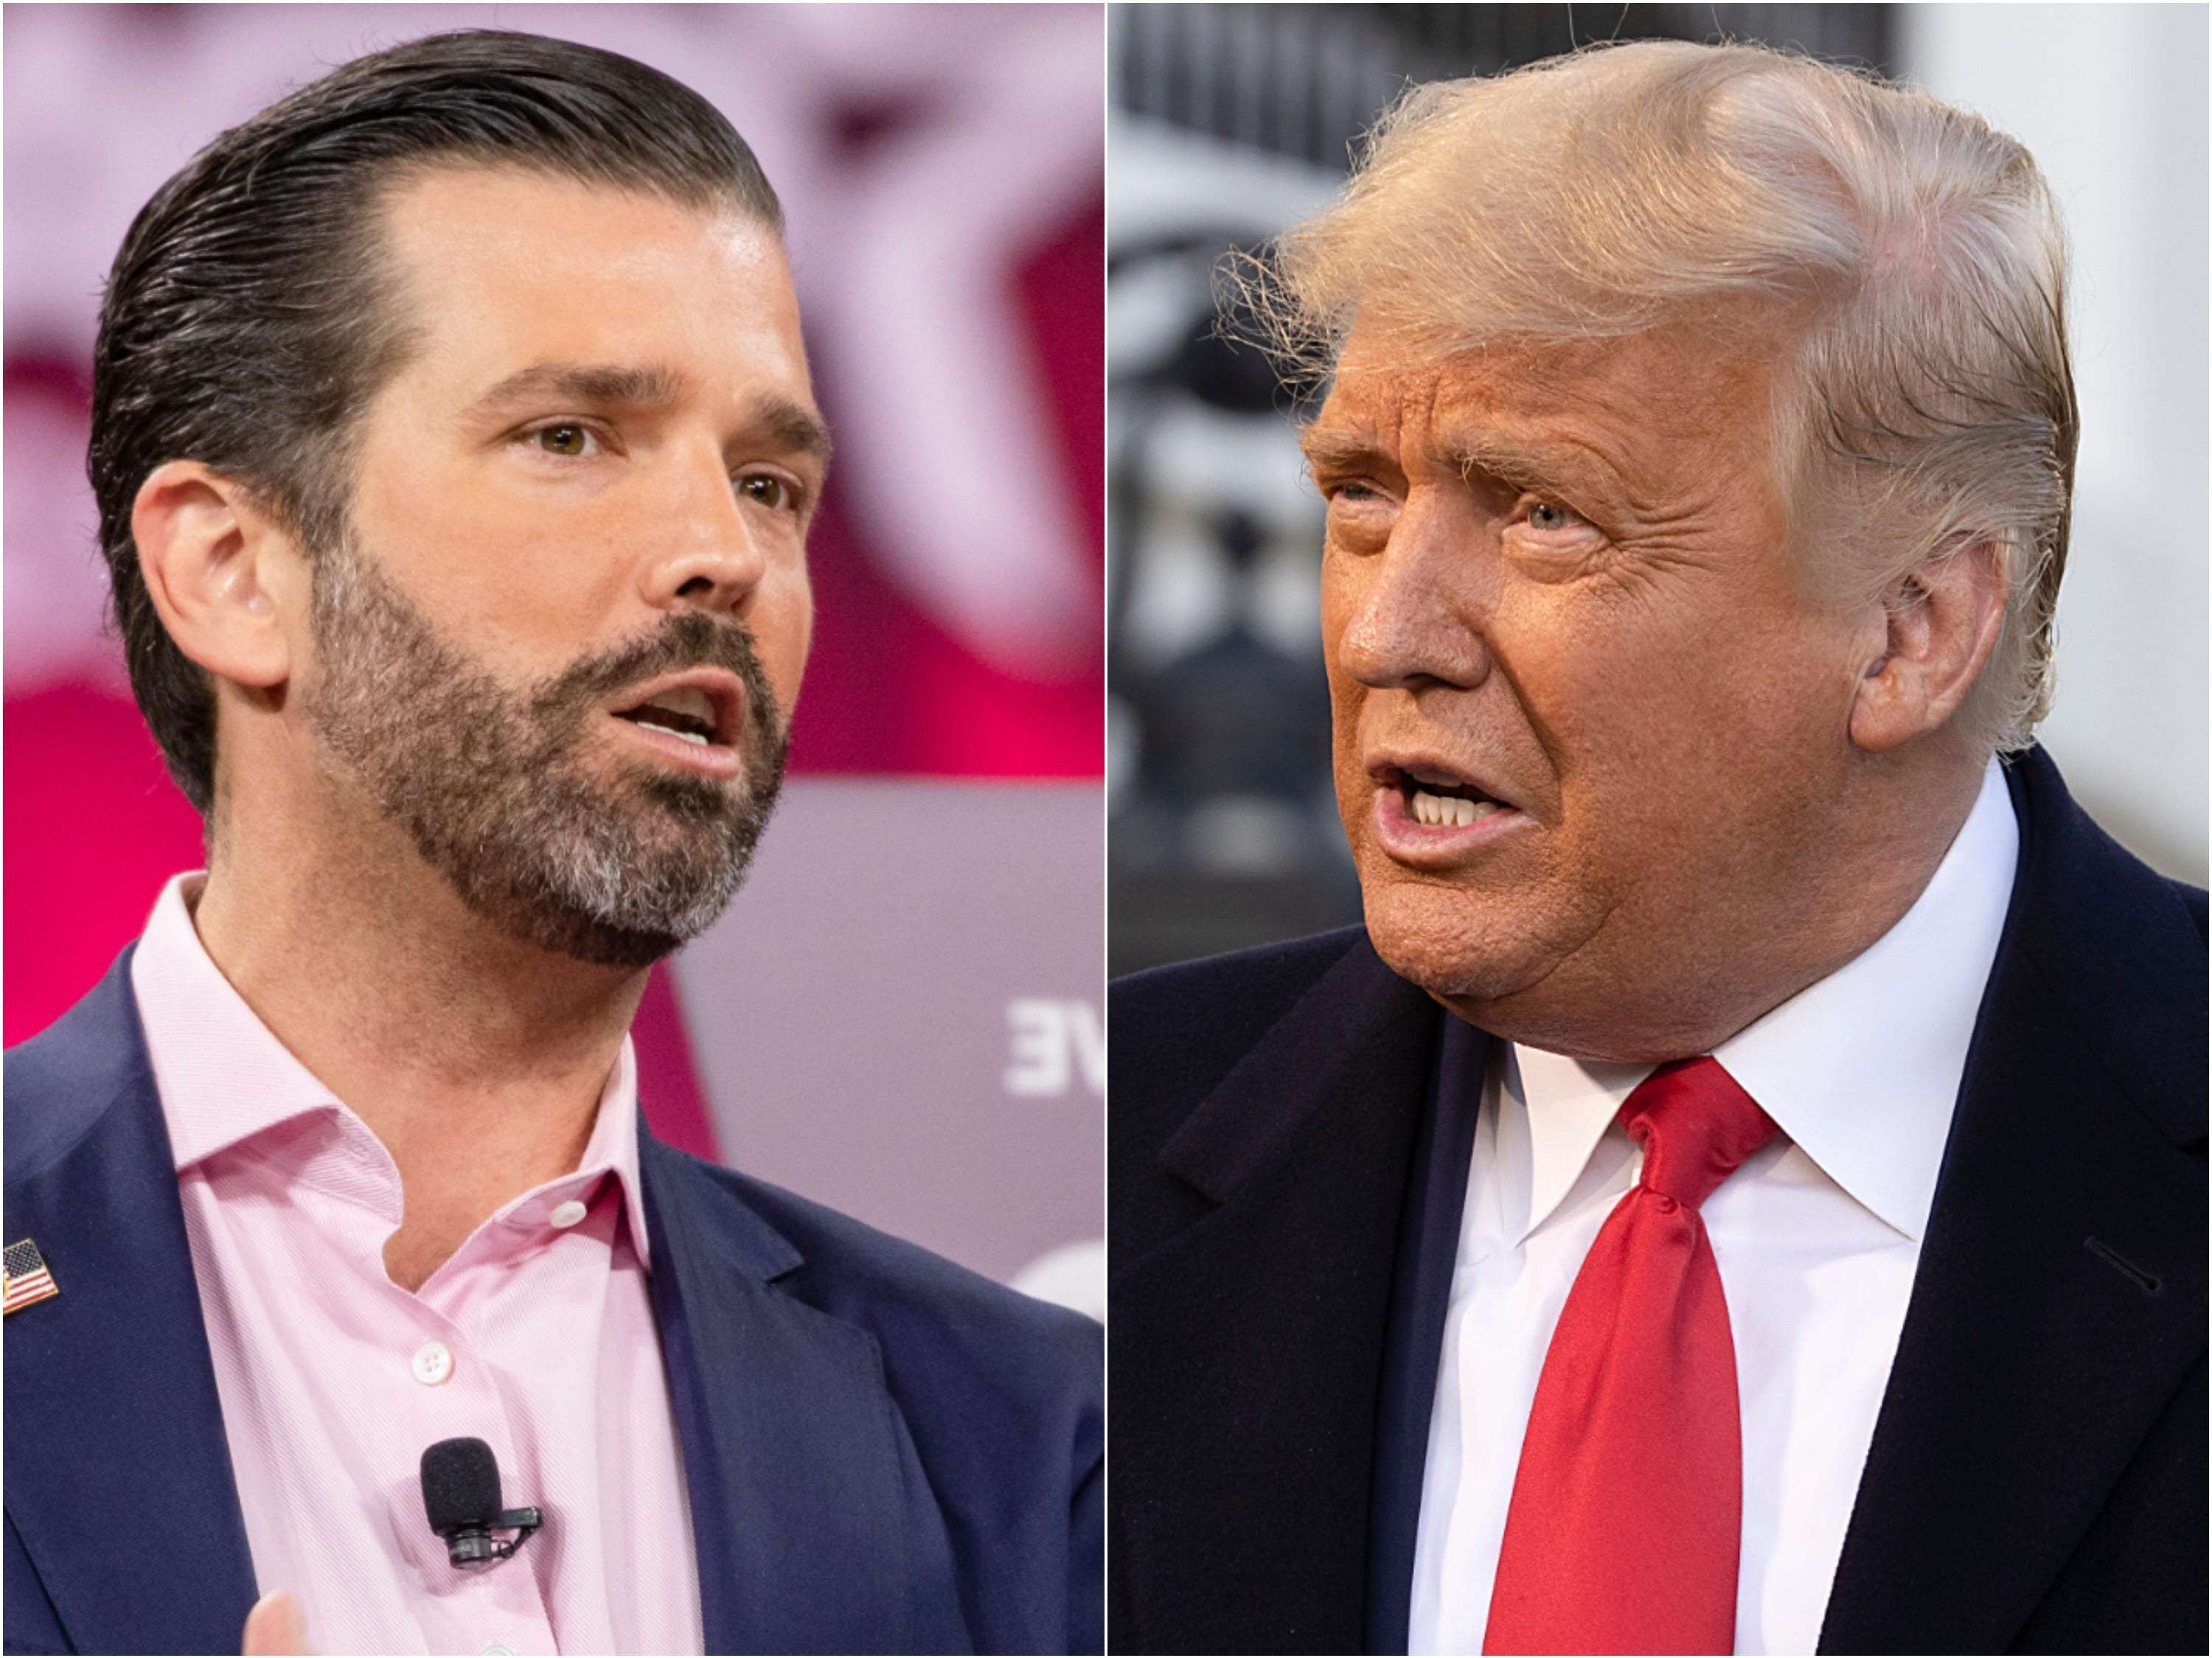 image for Donald Trump and his son Donald Trump Jr., without evidence, accuse Pfizer of deliberately waiting until after Election Day to release its COVID-19 vaccine trial results